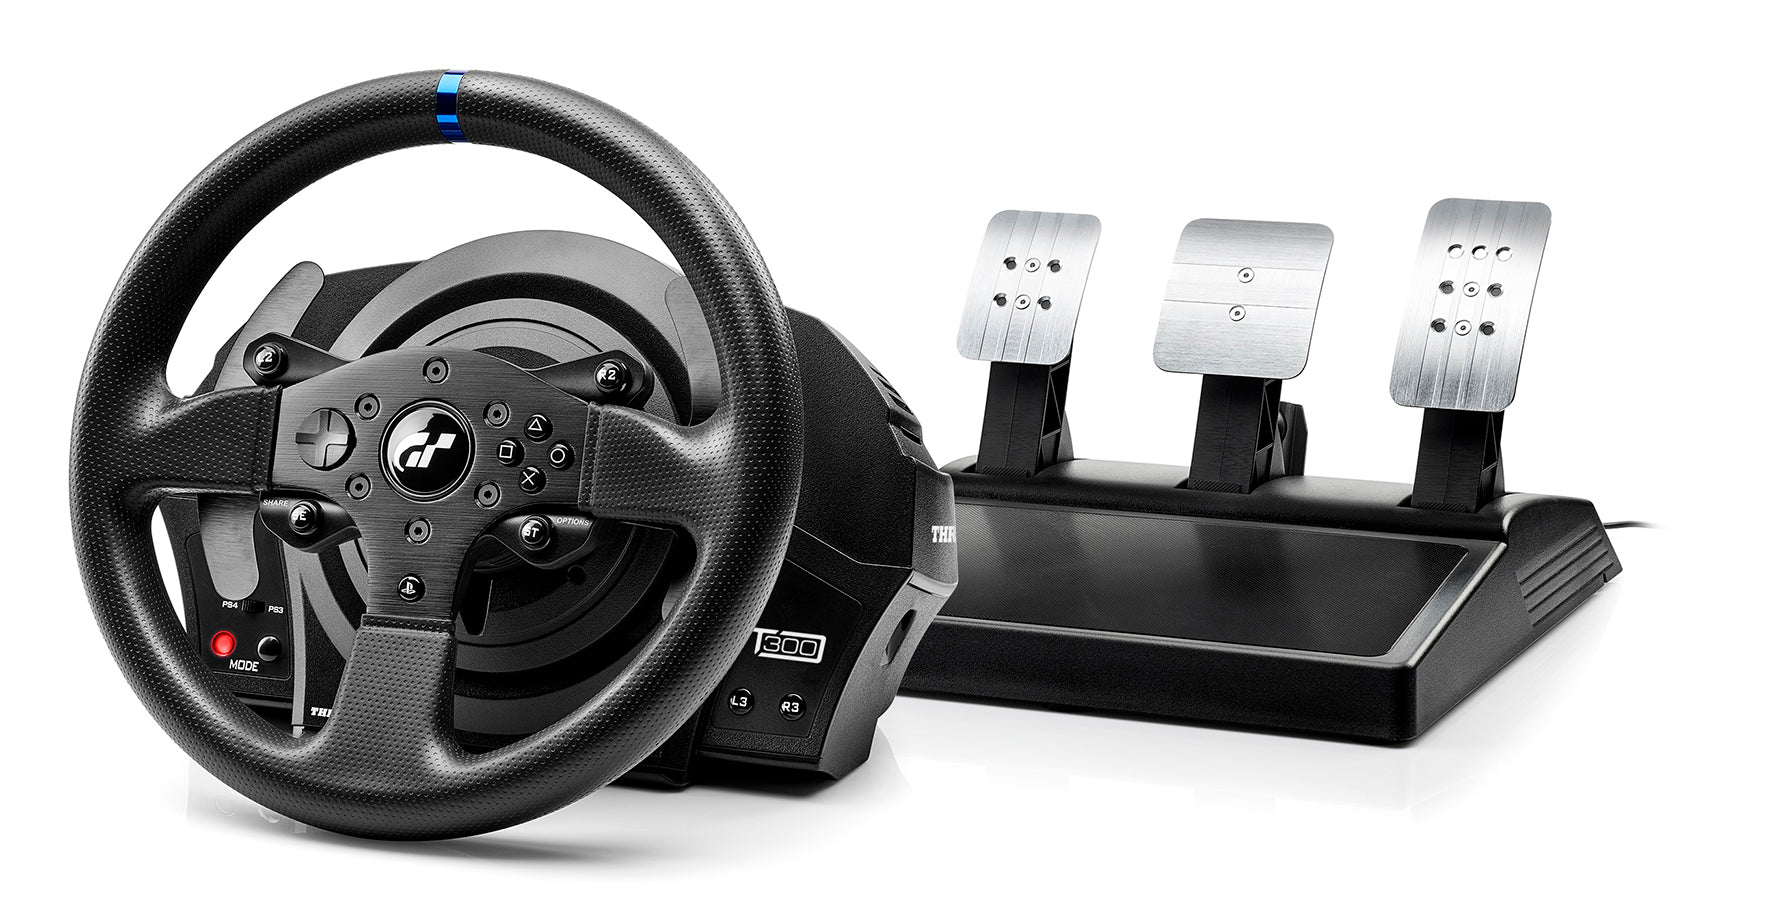 Thrustmaster T500 RS wheel and pedal set review